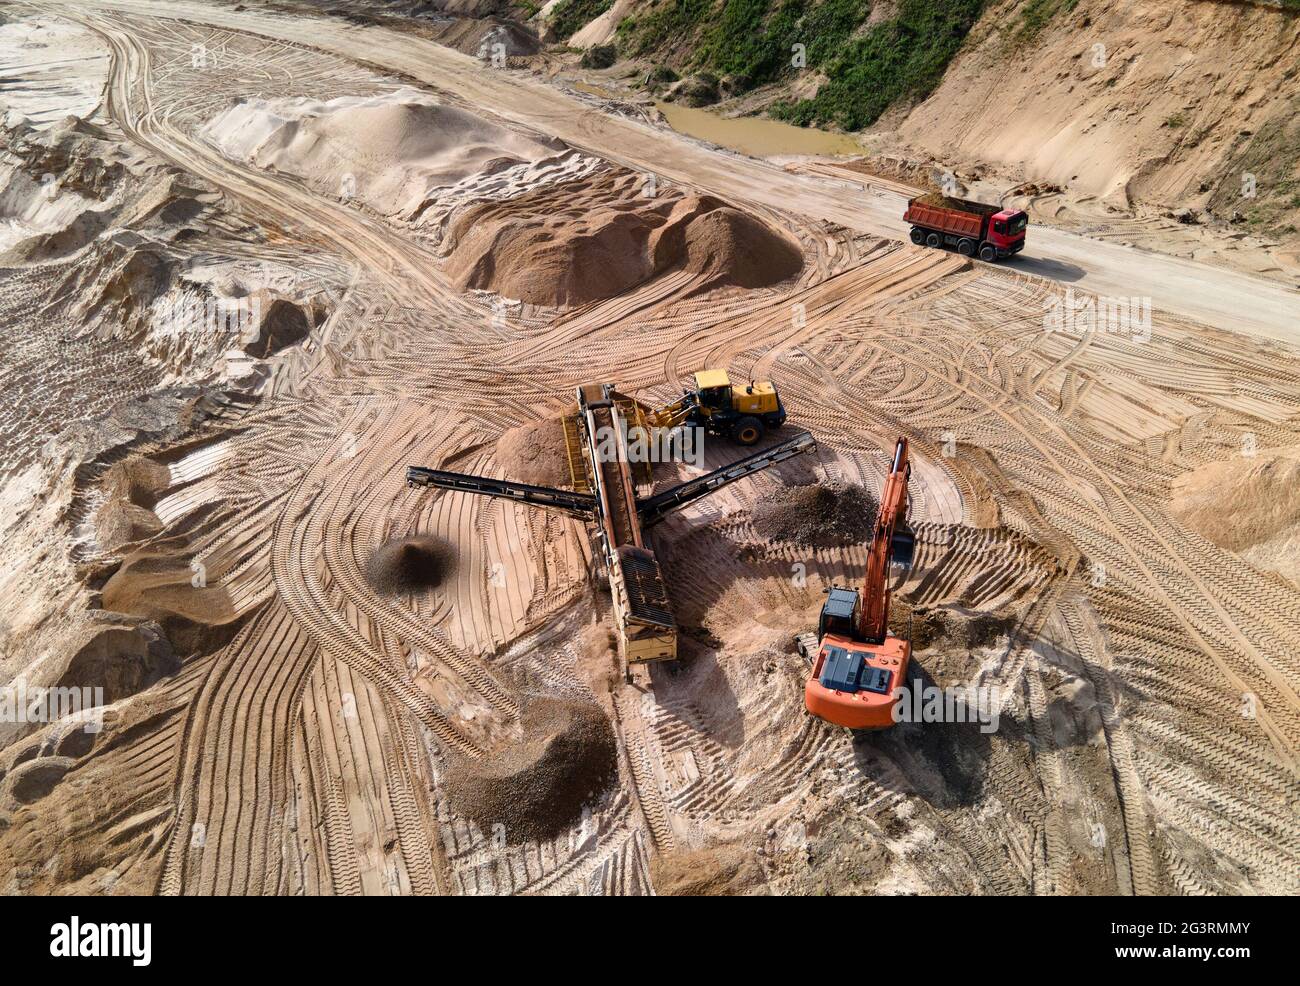 https://c8.alamy.com/comp/2G3RMMY/arial-view-of-the-sand-open-pit-mining-with-heavy-mining-machinery-mobile-stone-jaw-crusher-machine-in-open-pit-mine-wheel-loader-and-dump-truck-in-2G3RMMY.jpg